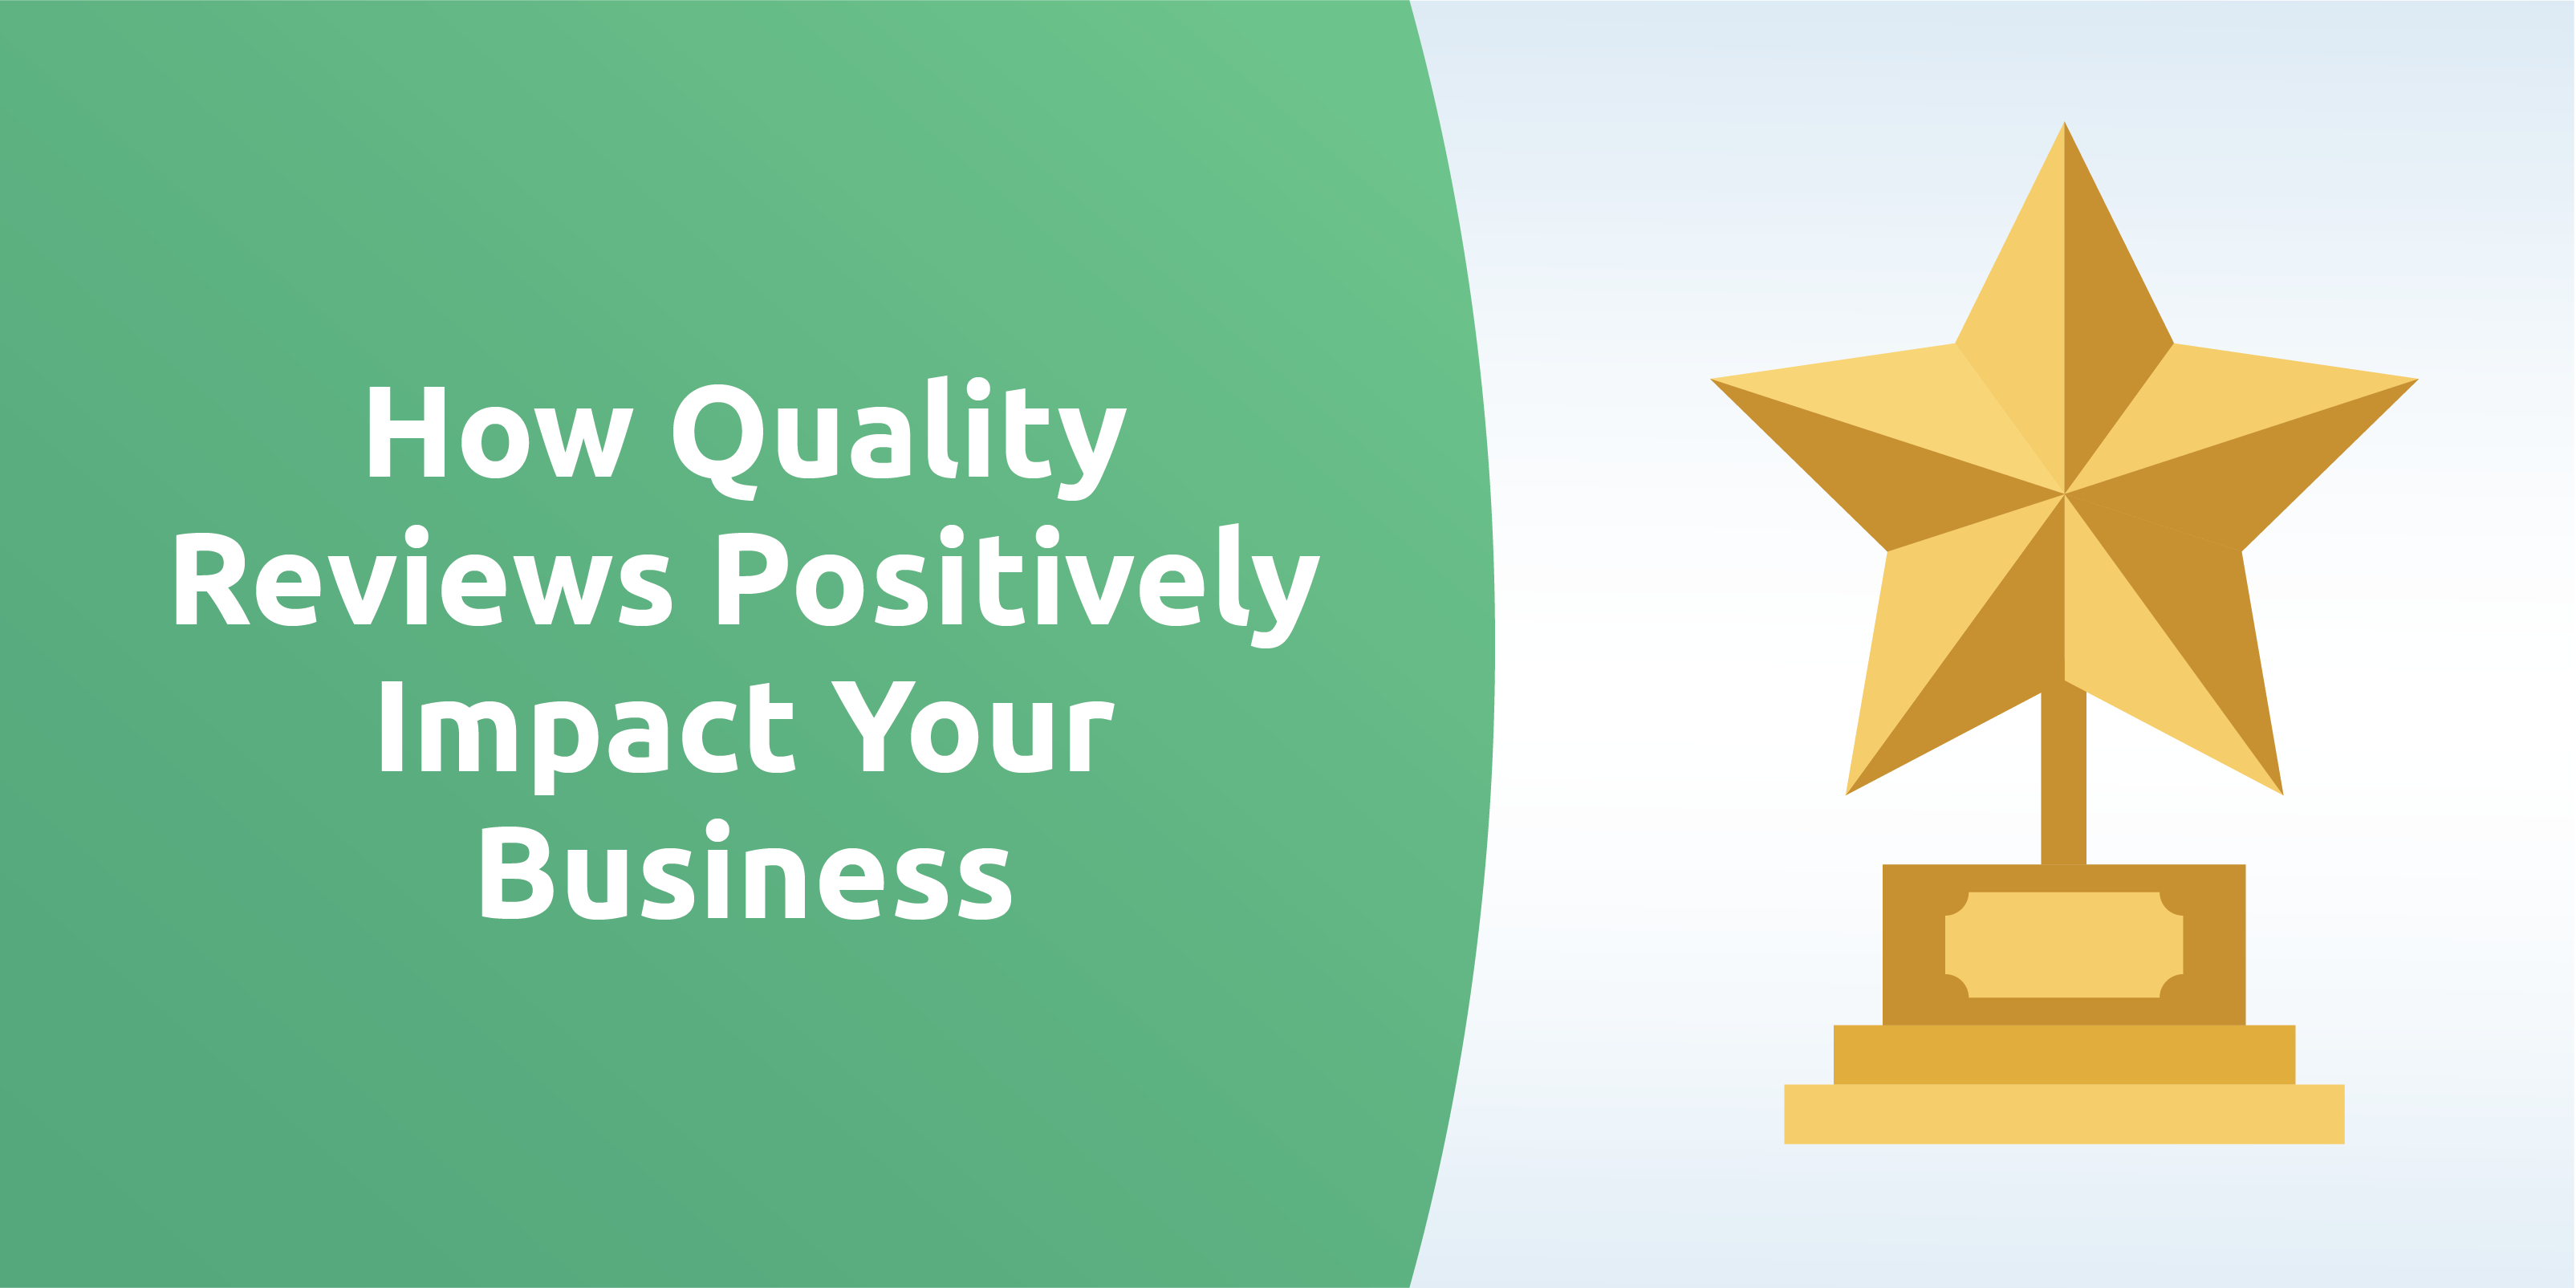 How Quality Reviews Positively Impact Your Business